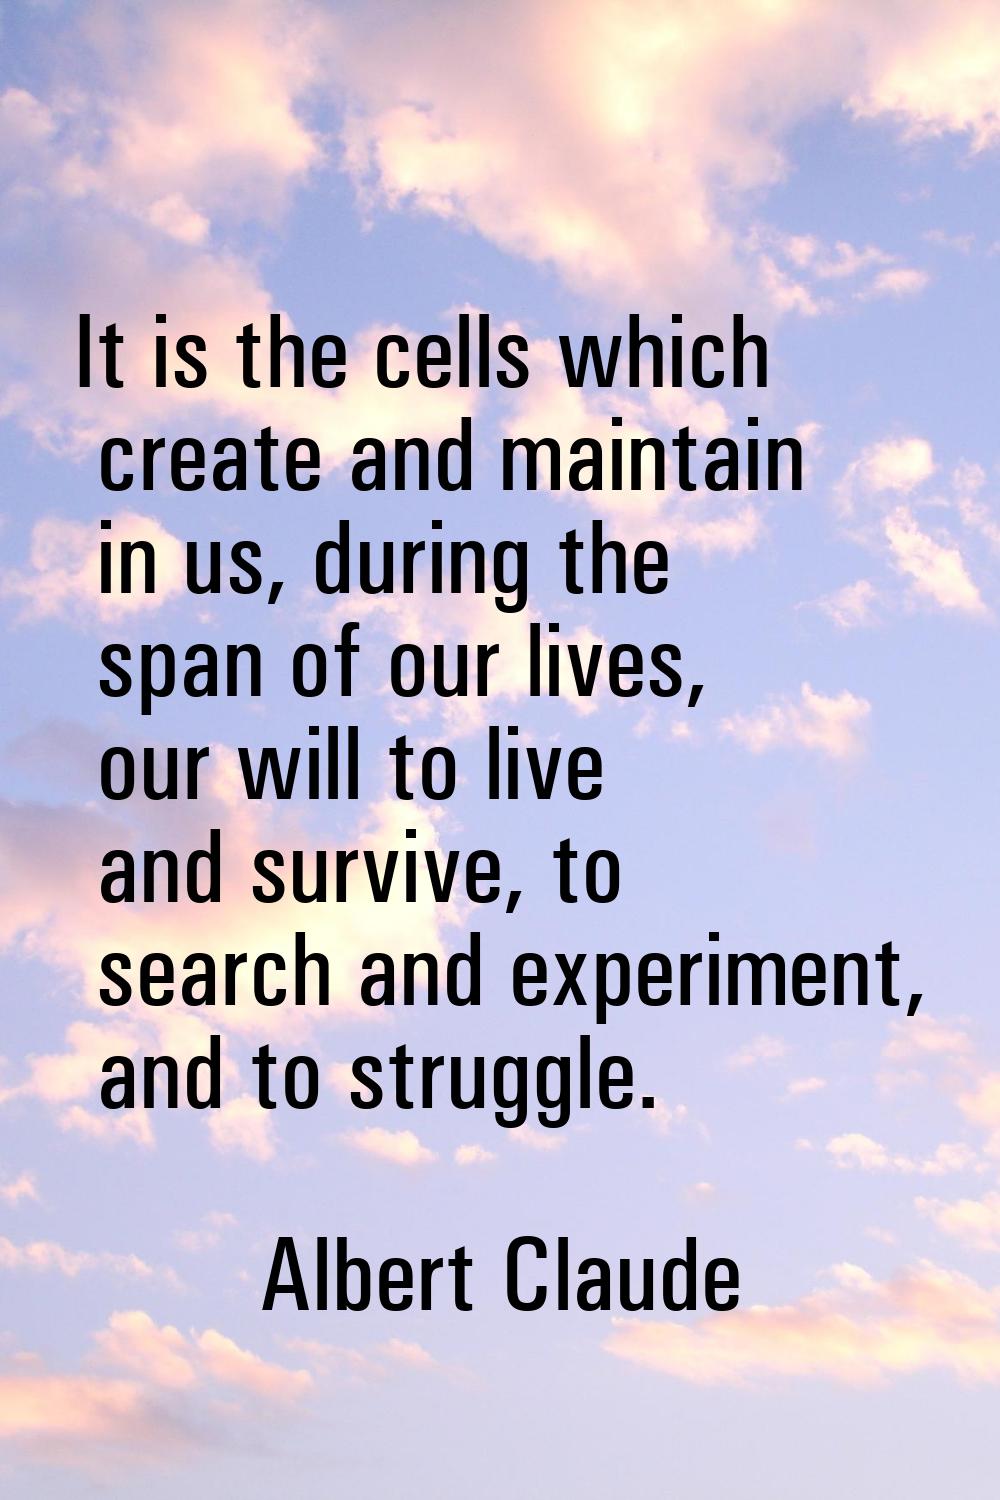 It is the cells which create and maintain in us, during the span of our lives, our will to live and